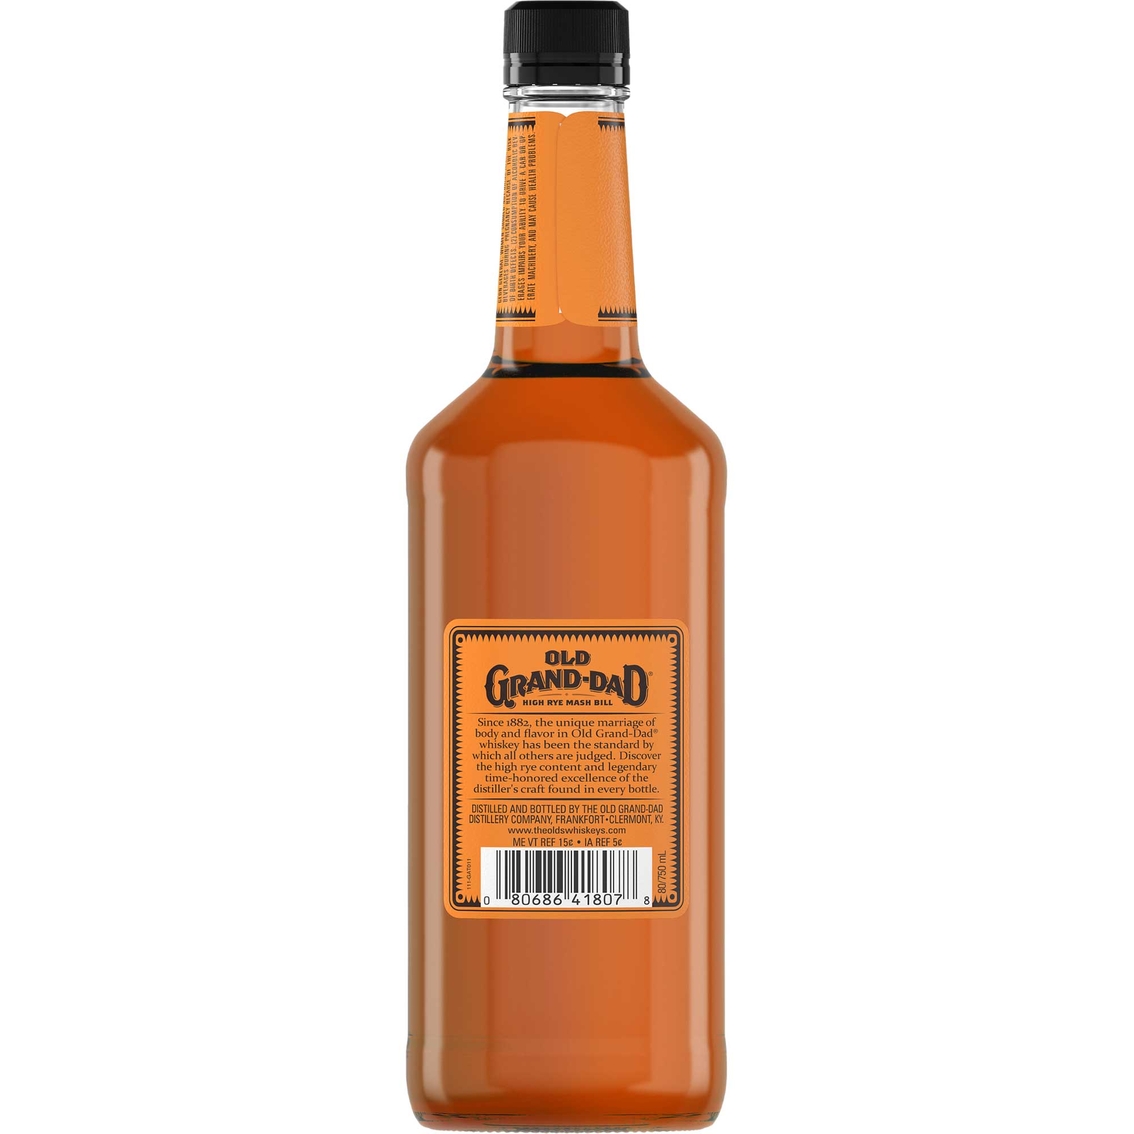 Old Grand Dad Bourbon 750ml - Image 2 of 2